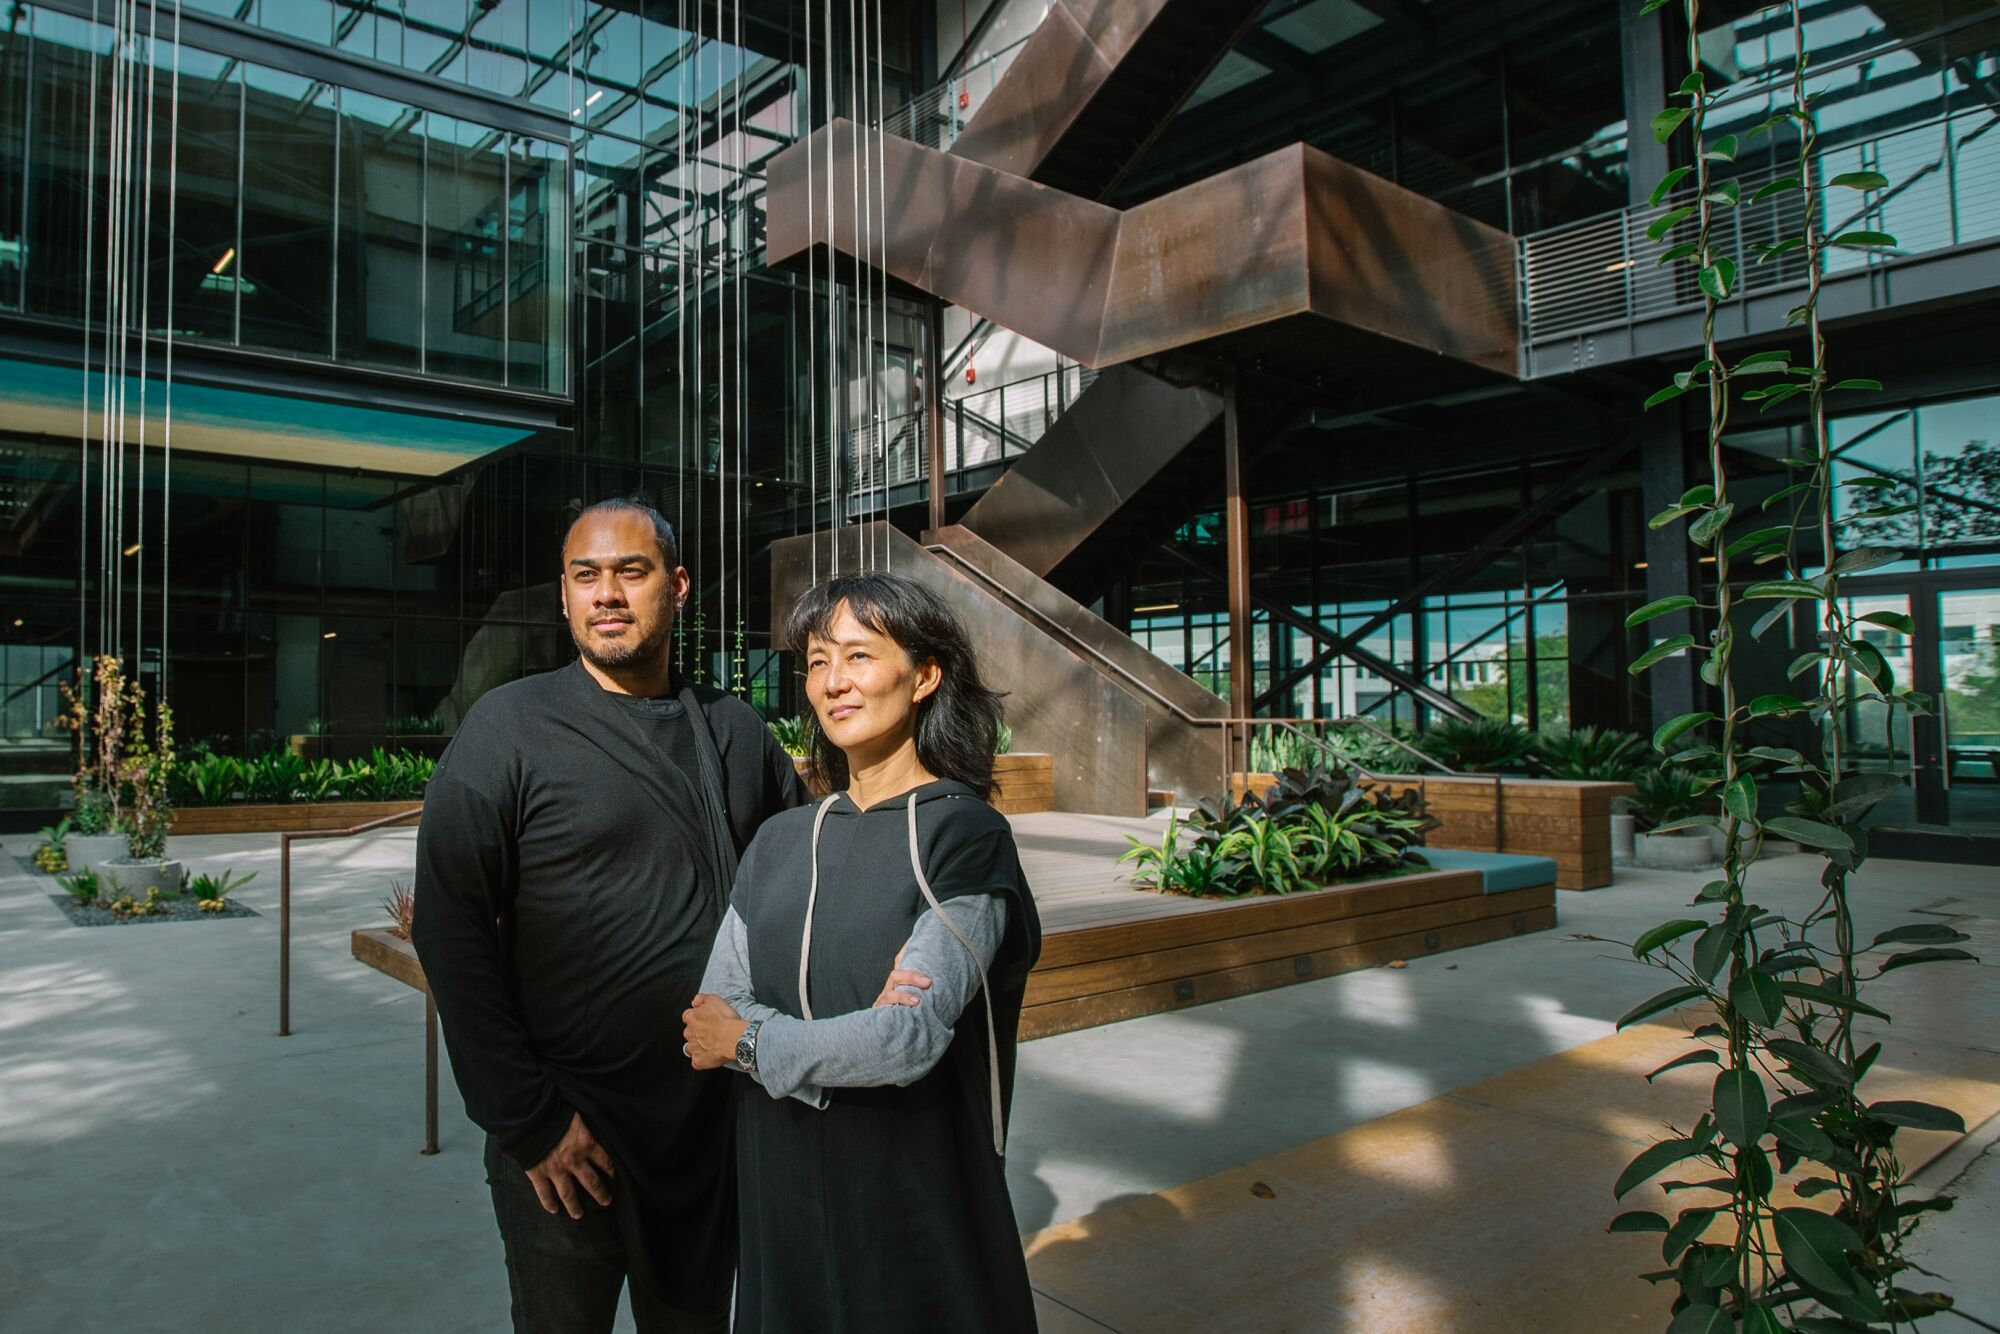 George Racomura and Patricia Rhee are seen standing in the atrium at the Press, before a staircase wrapped in Cor-Ten steel